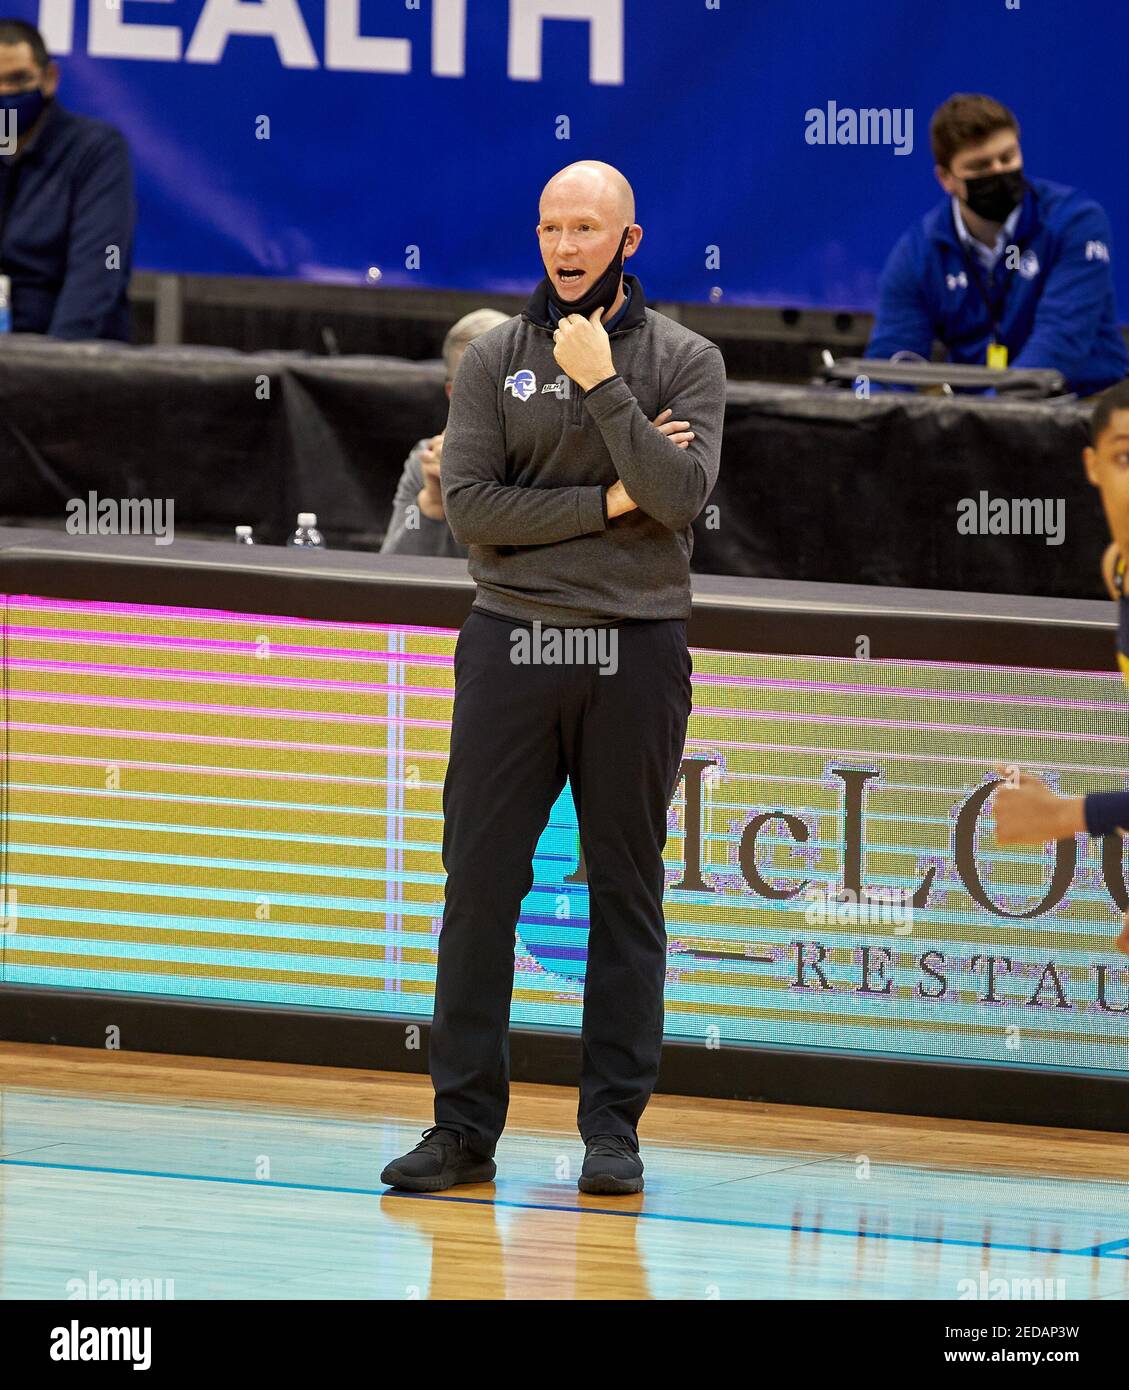 Newark, New Jersey, USA. 14th Feb, 2021. Seton Hall Pirates head coach Kevin Willard at the Prudential Center in Newark, New Jersey against Marquette. Seton defeated Marquette 57-51. Duncan Williams/CSM/Alamy Live News Stock Photo